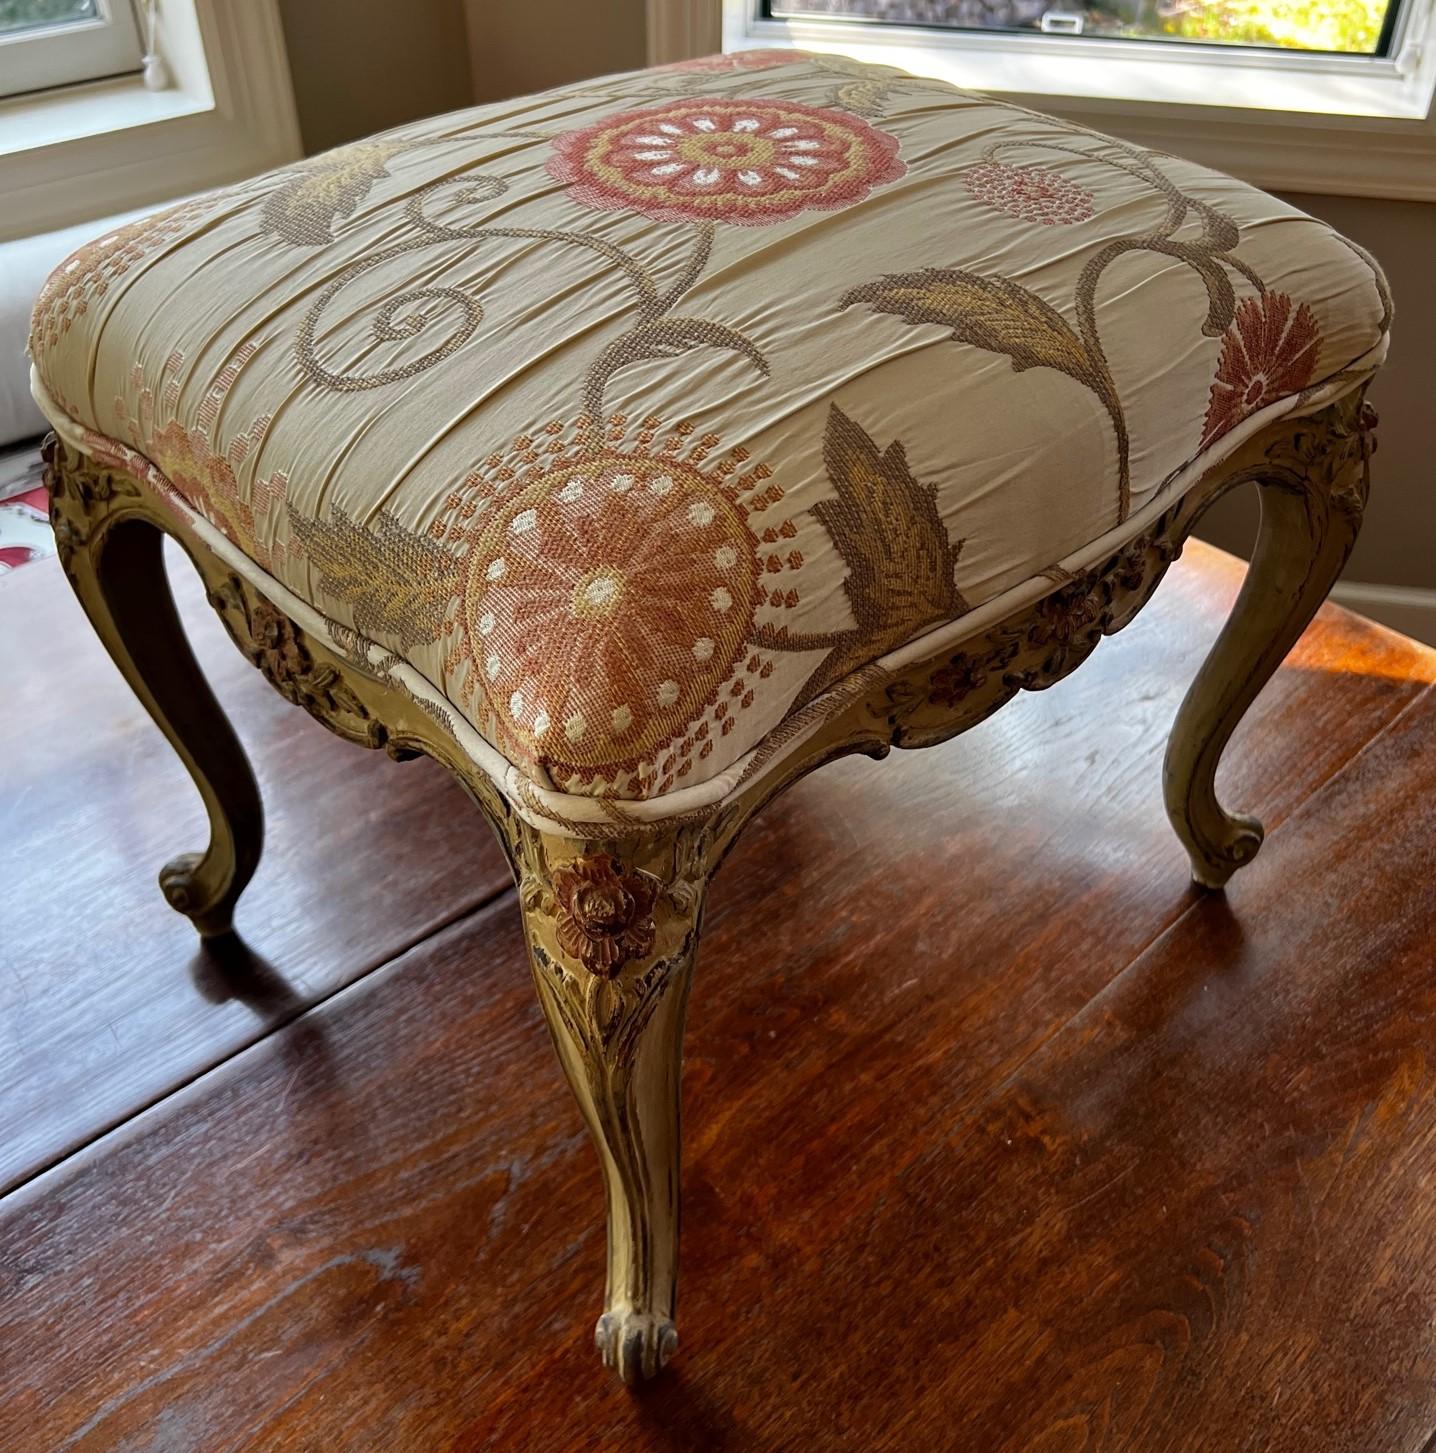 Mid 20th c., New York, a low stool in the Louis XV style with a carved and painted wood frame from the Thomas De Angelis workshop. The stool was custom made for a dame of American society and a member of the Rockefeller family. The frame is